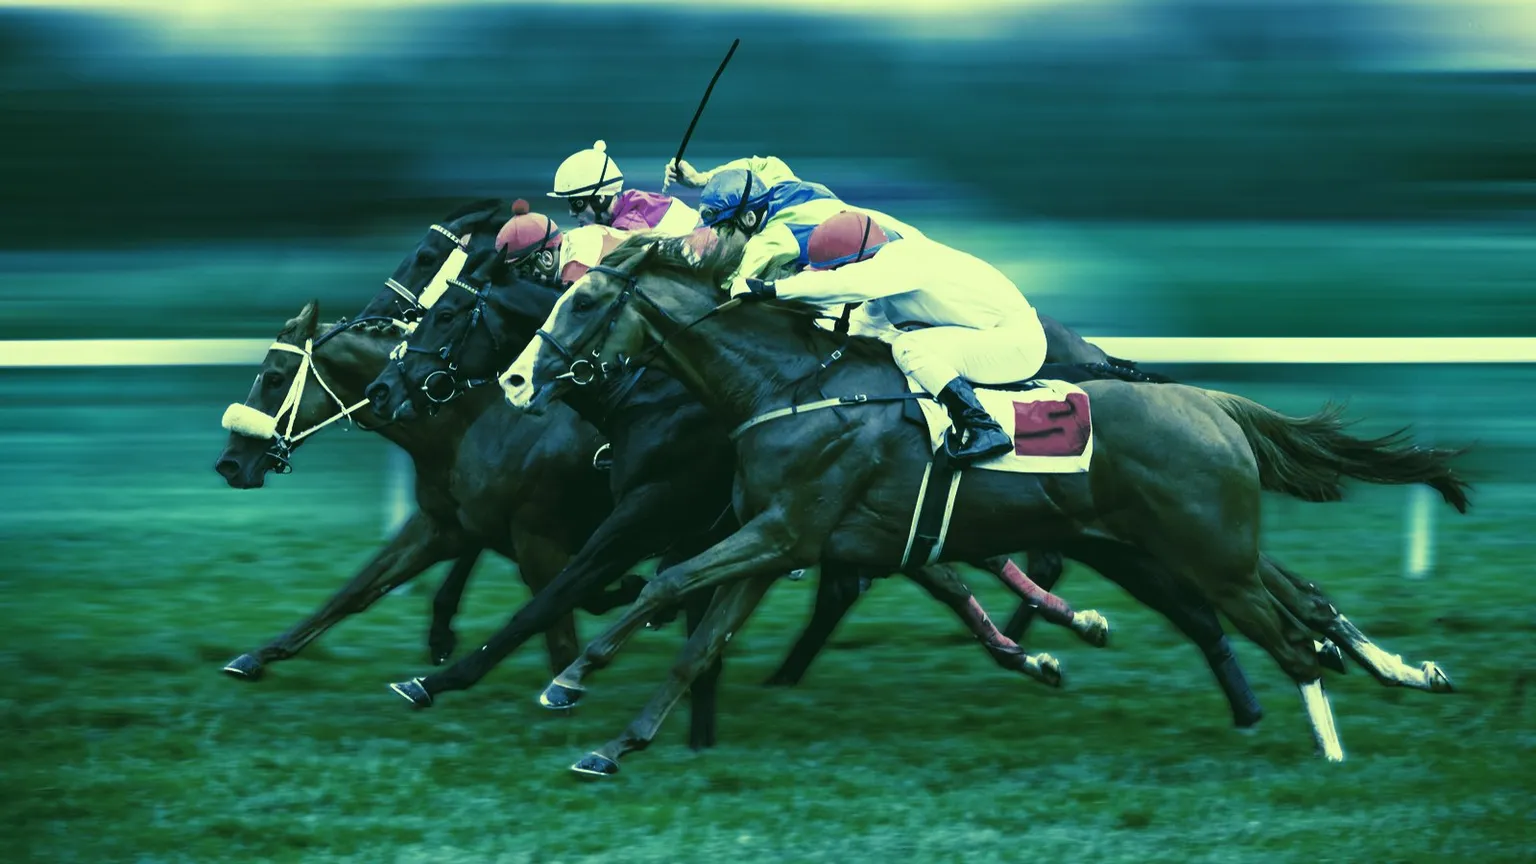 A day at the races. Image: Shutterstock